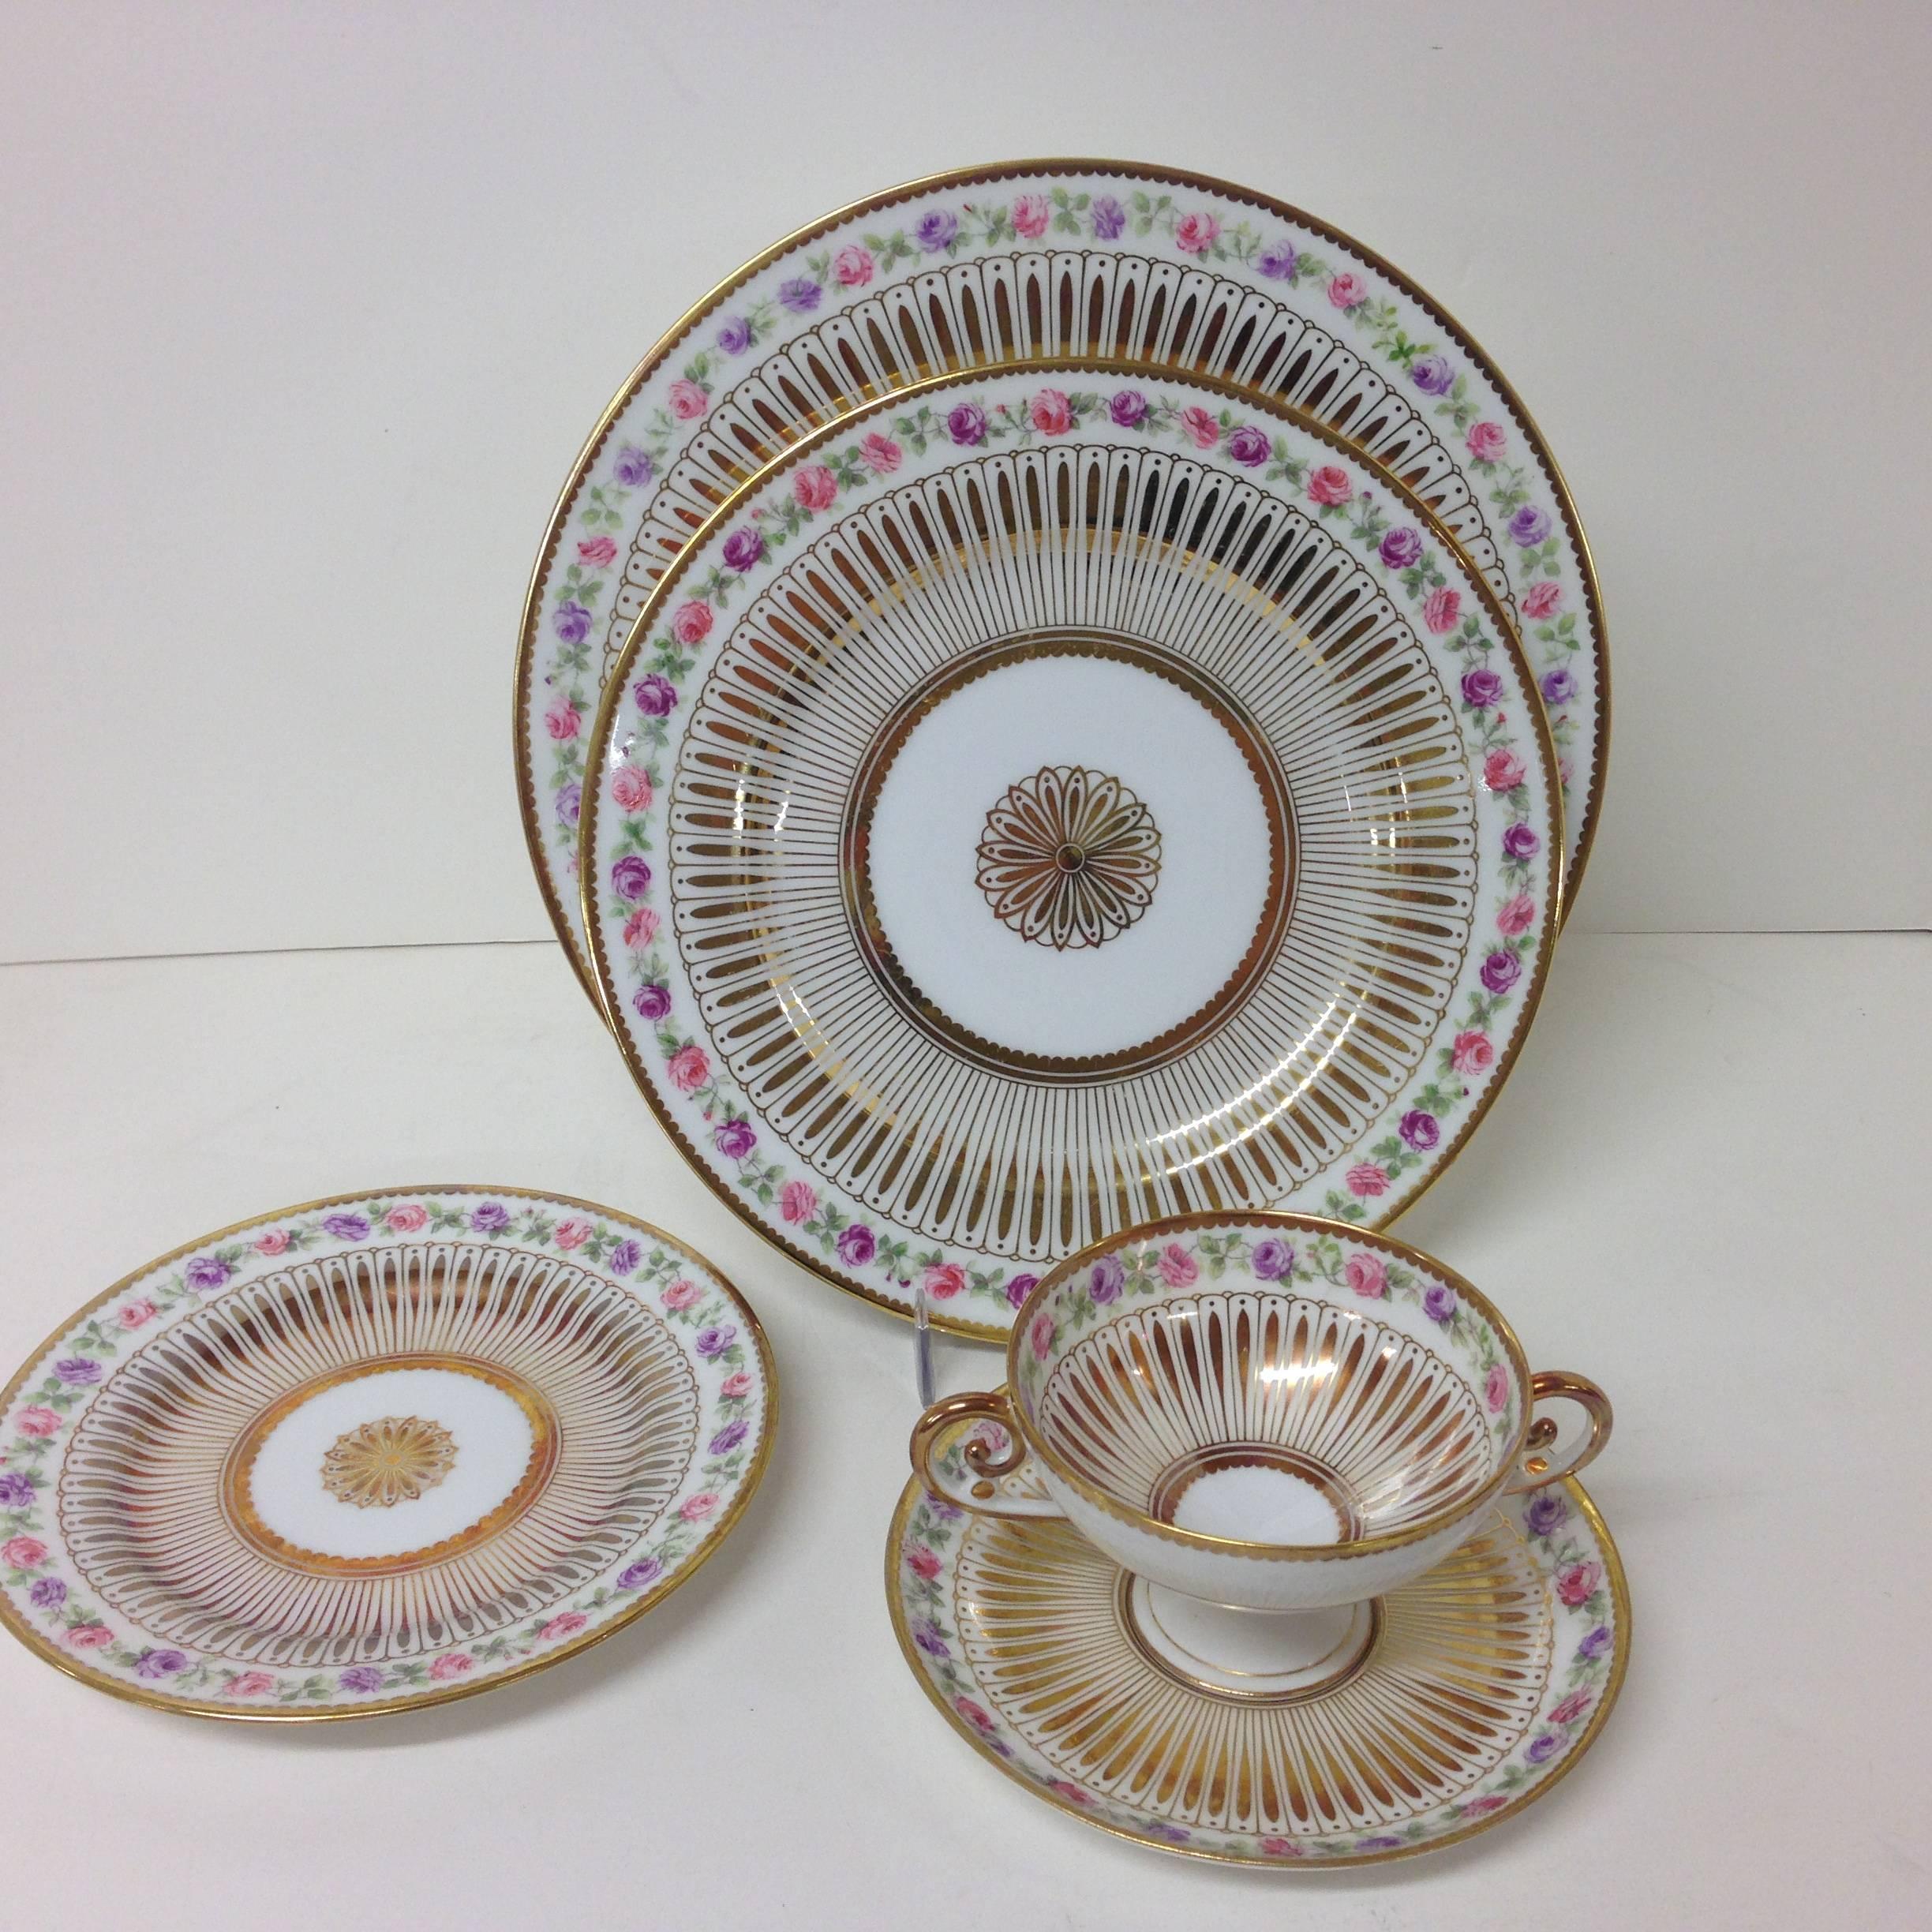 An enormous and large tabletop service direct from the family who has owned it for over 100 years. Antique porcelains from Charles Ahrenfeldt custom ordered through Richard Briggs of Boston for 12+ (18 dinner plates!) and glassware for almost 12 of